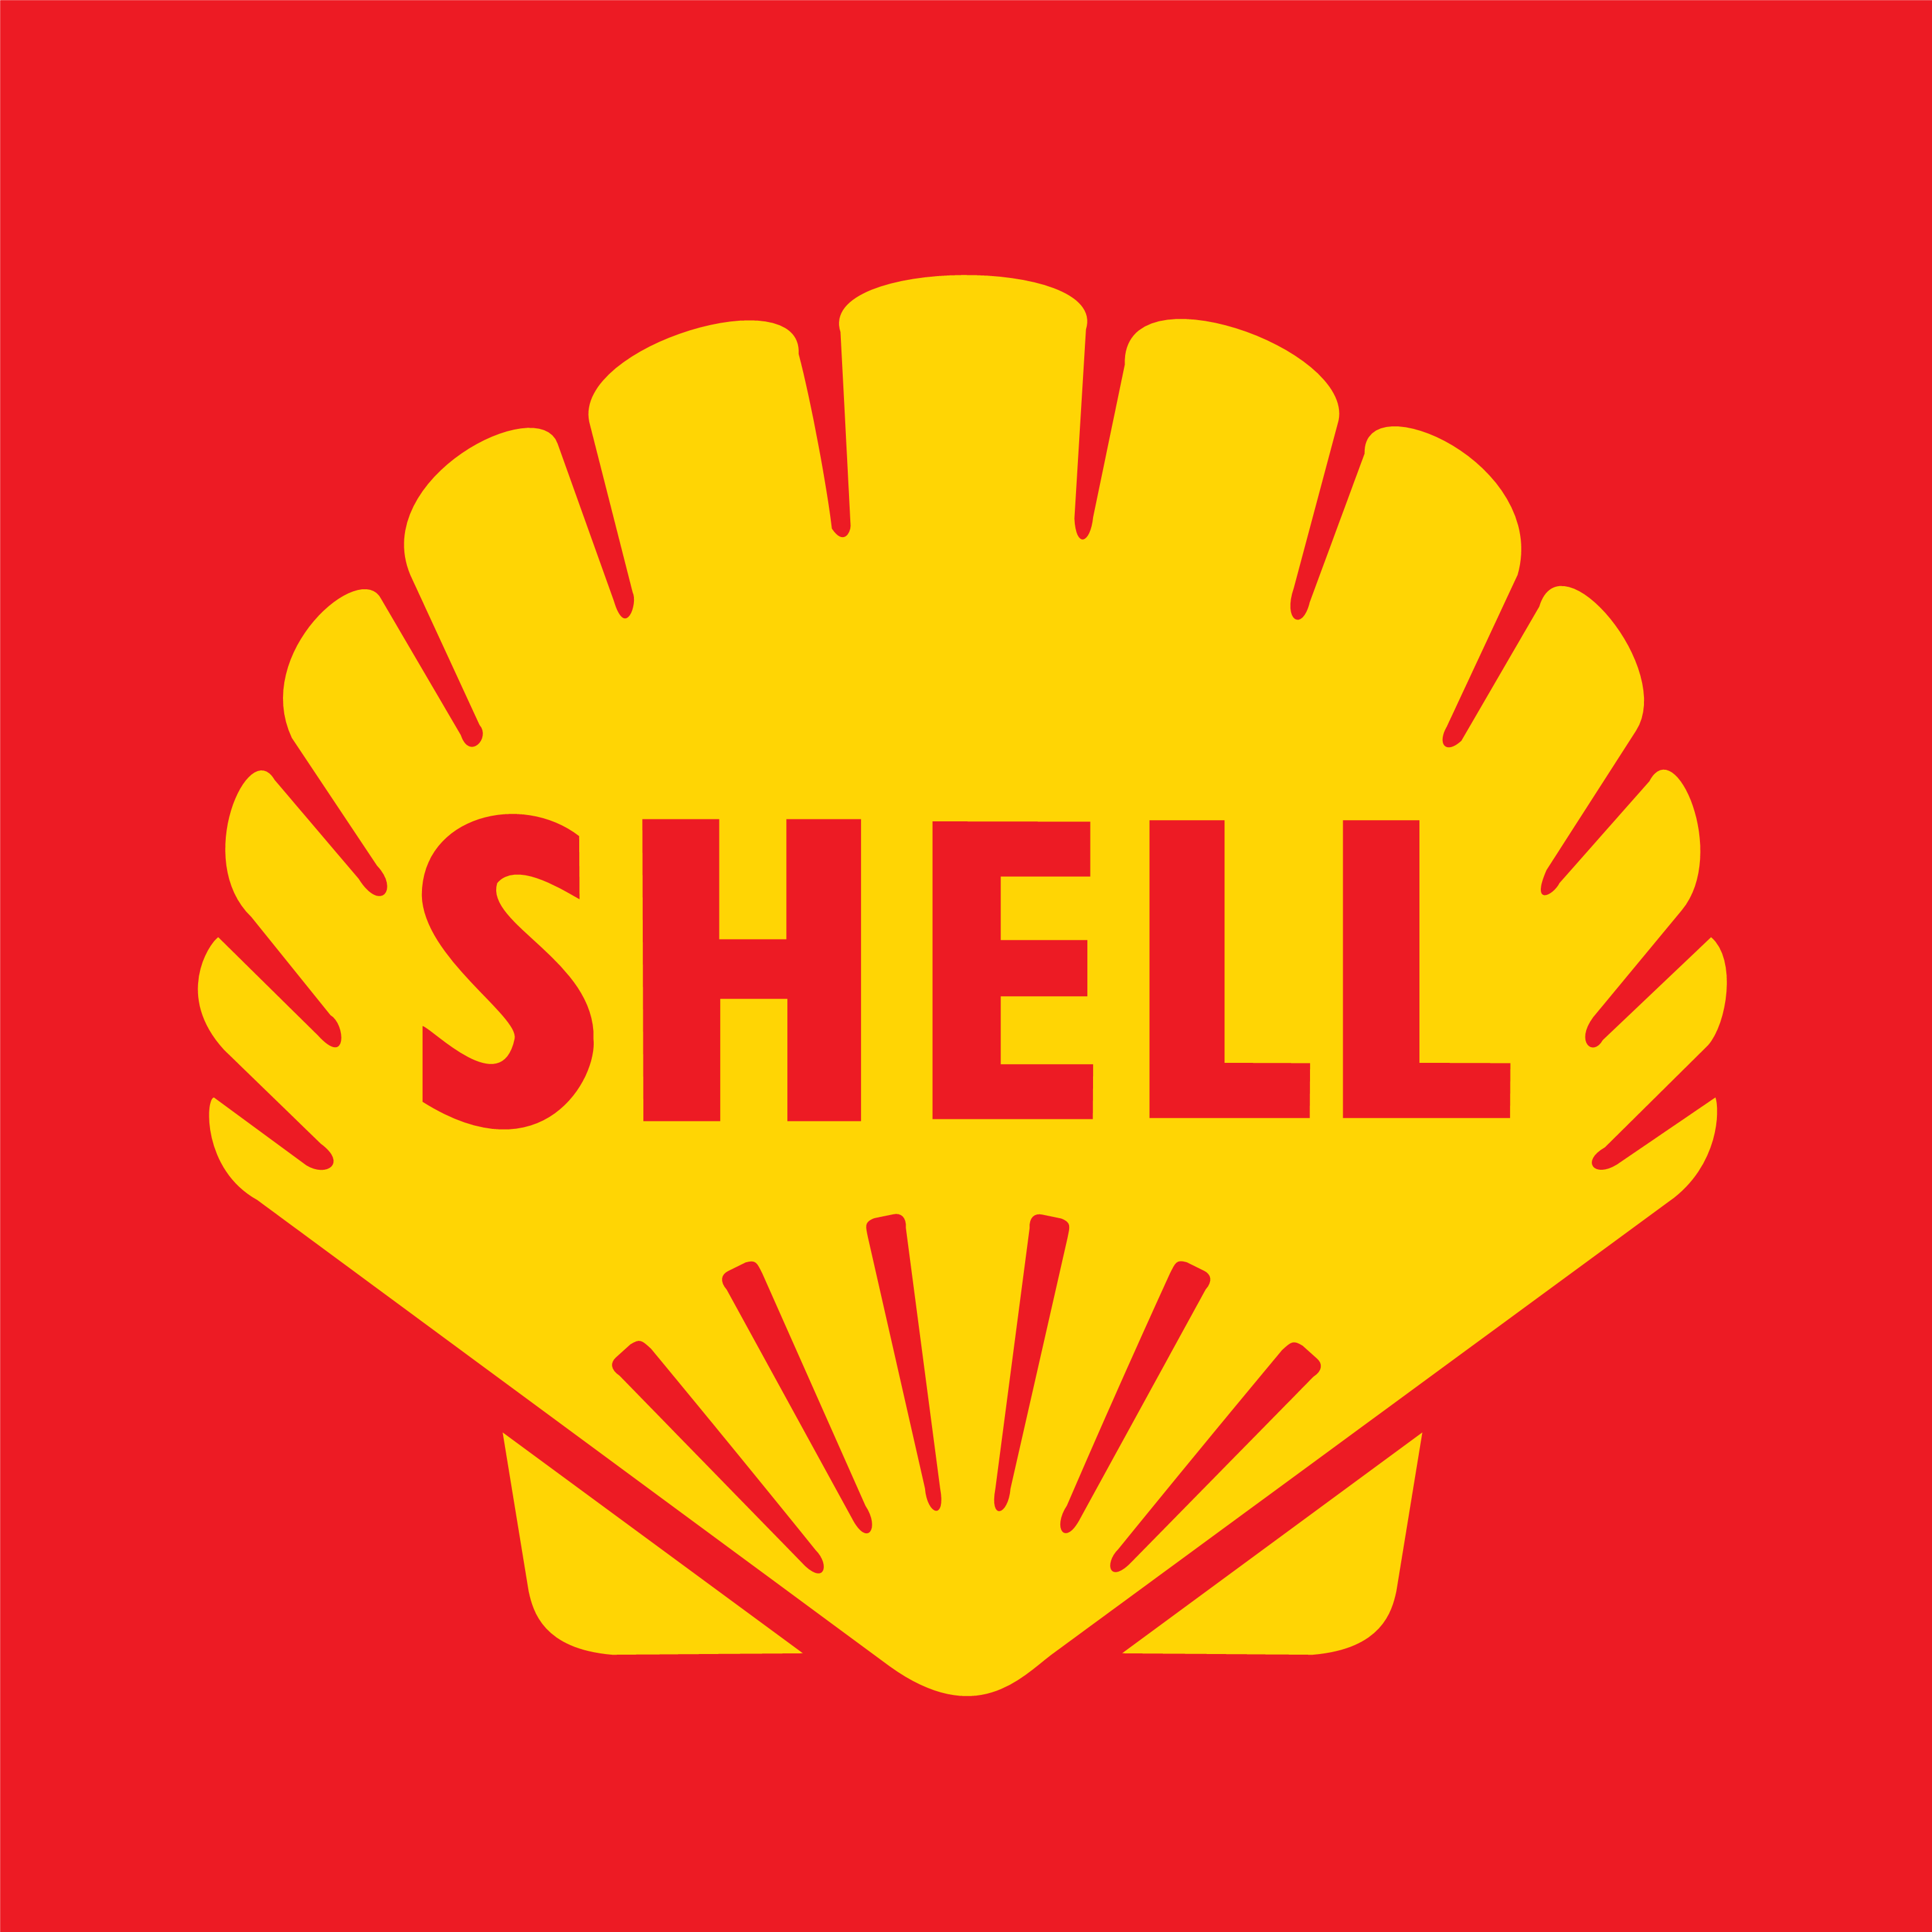 Red and Yellow Shell Logo - Shell: The evolution of a logo